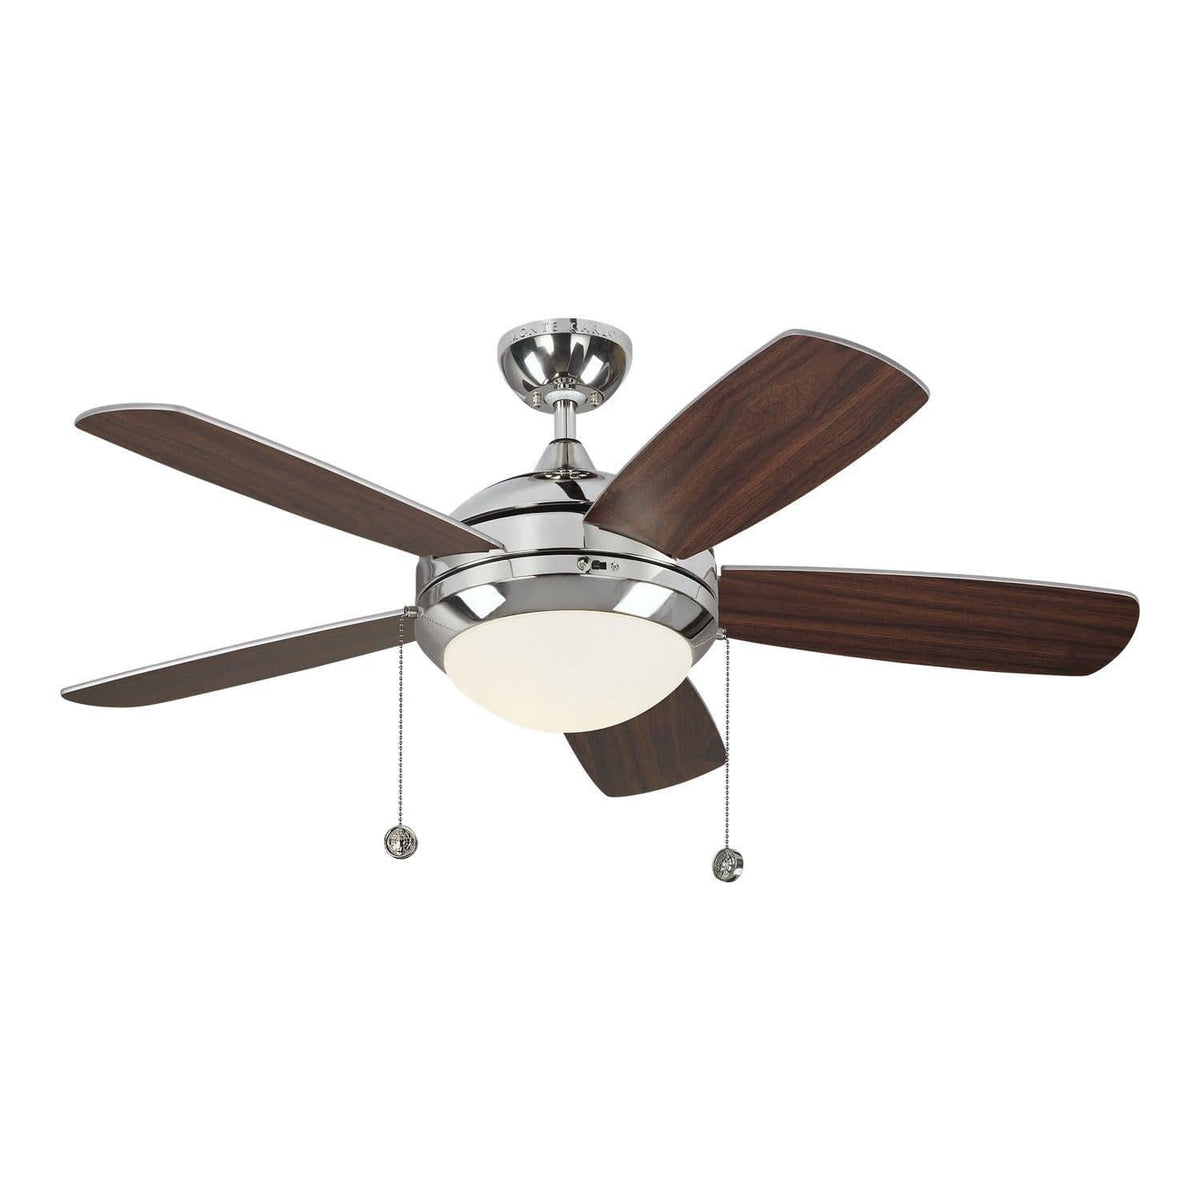 Visual Comfort Fan Collection - Discus Classic II 44" Ceiling Fan - 5DIC44PND-V1 | Montreal Lighting & Hardware